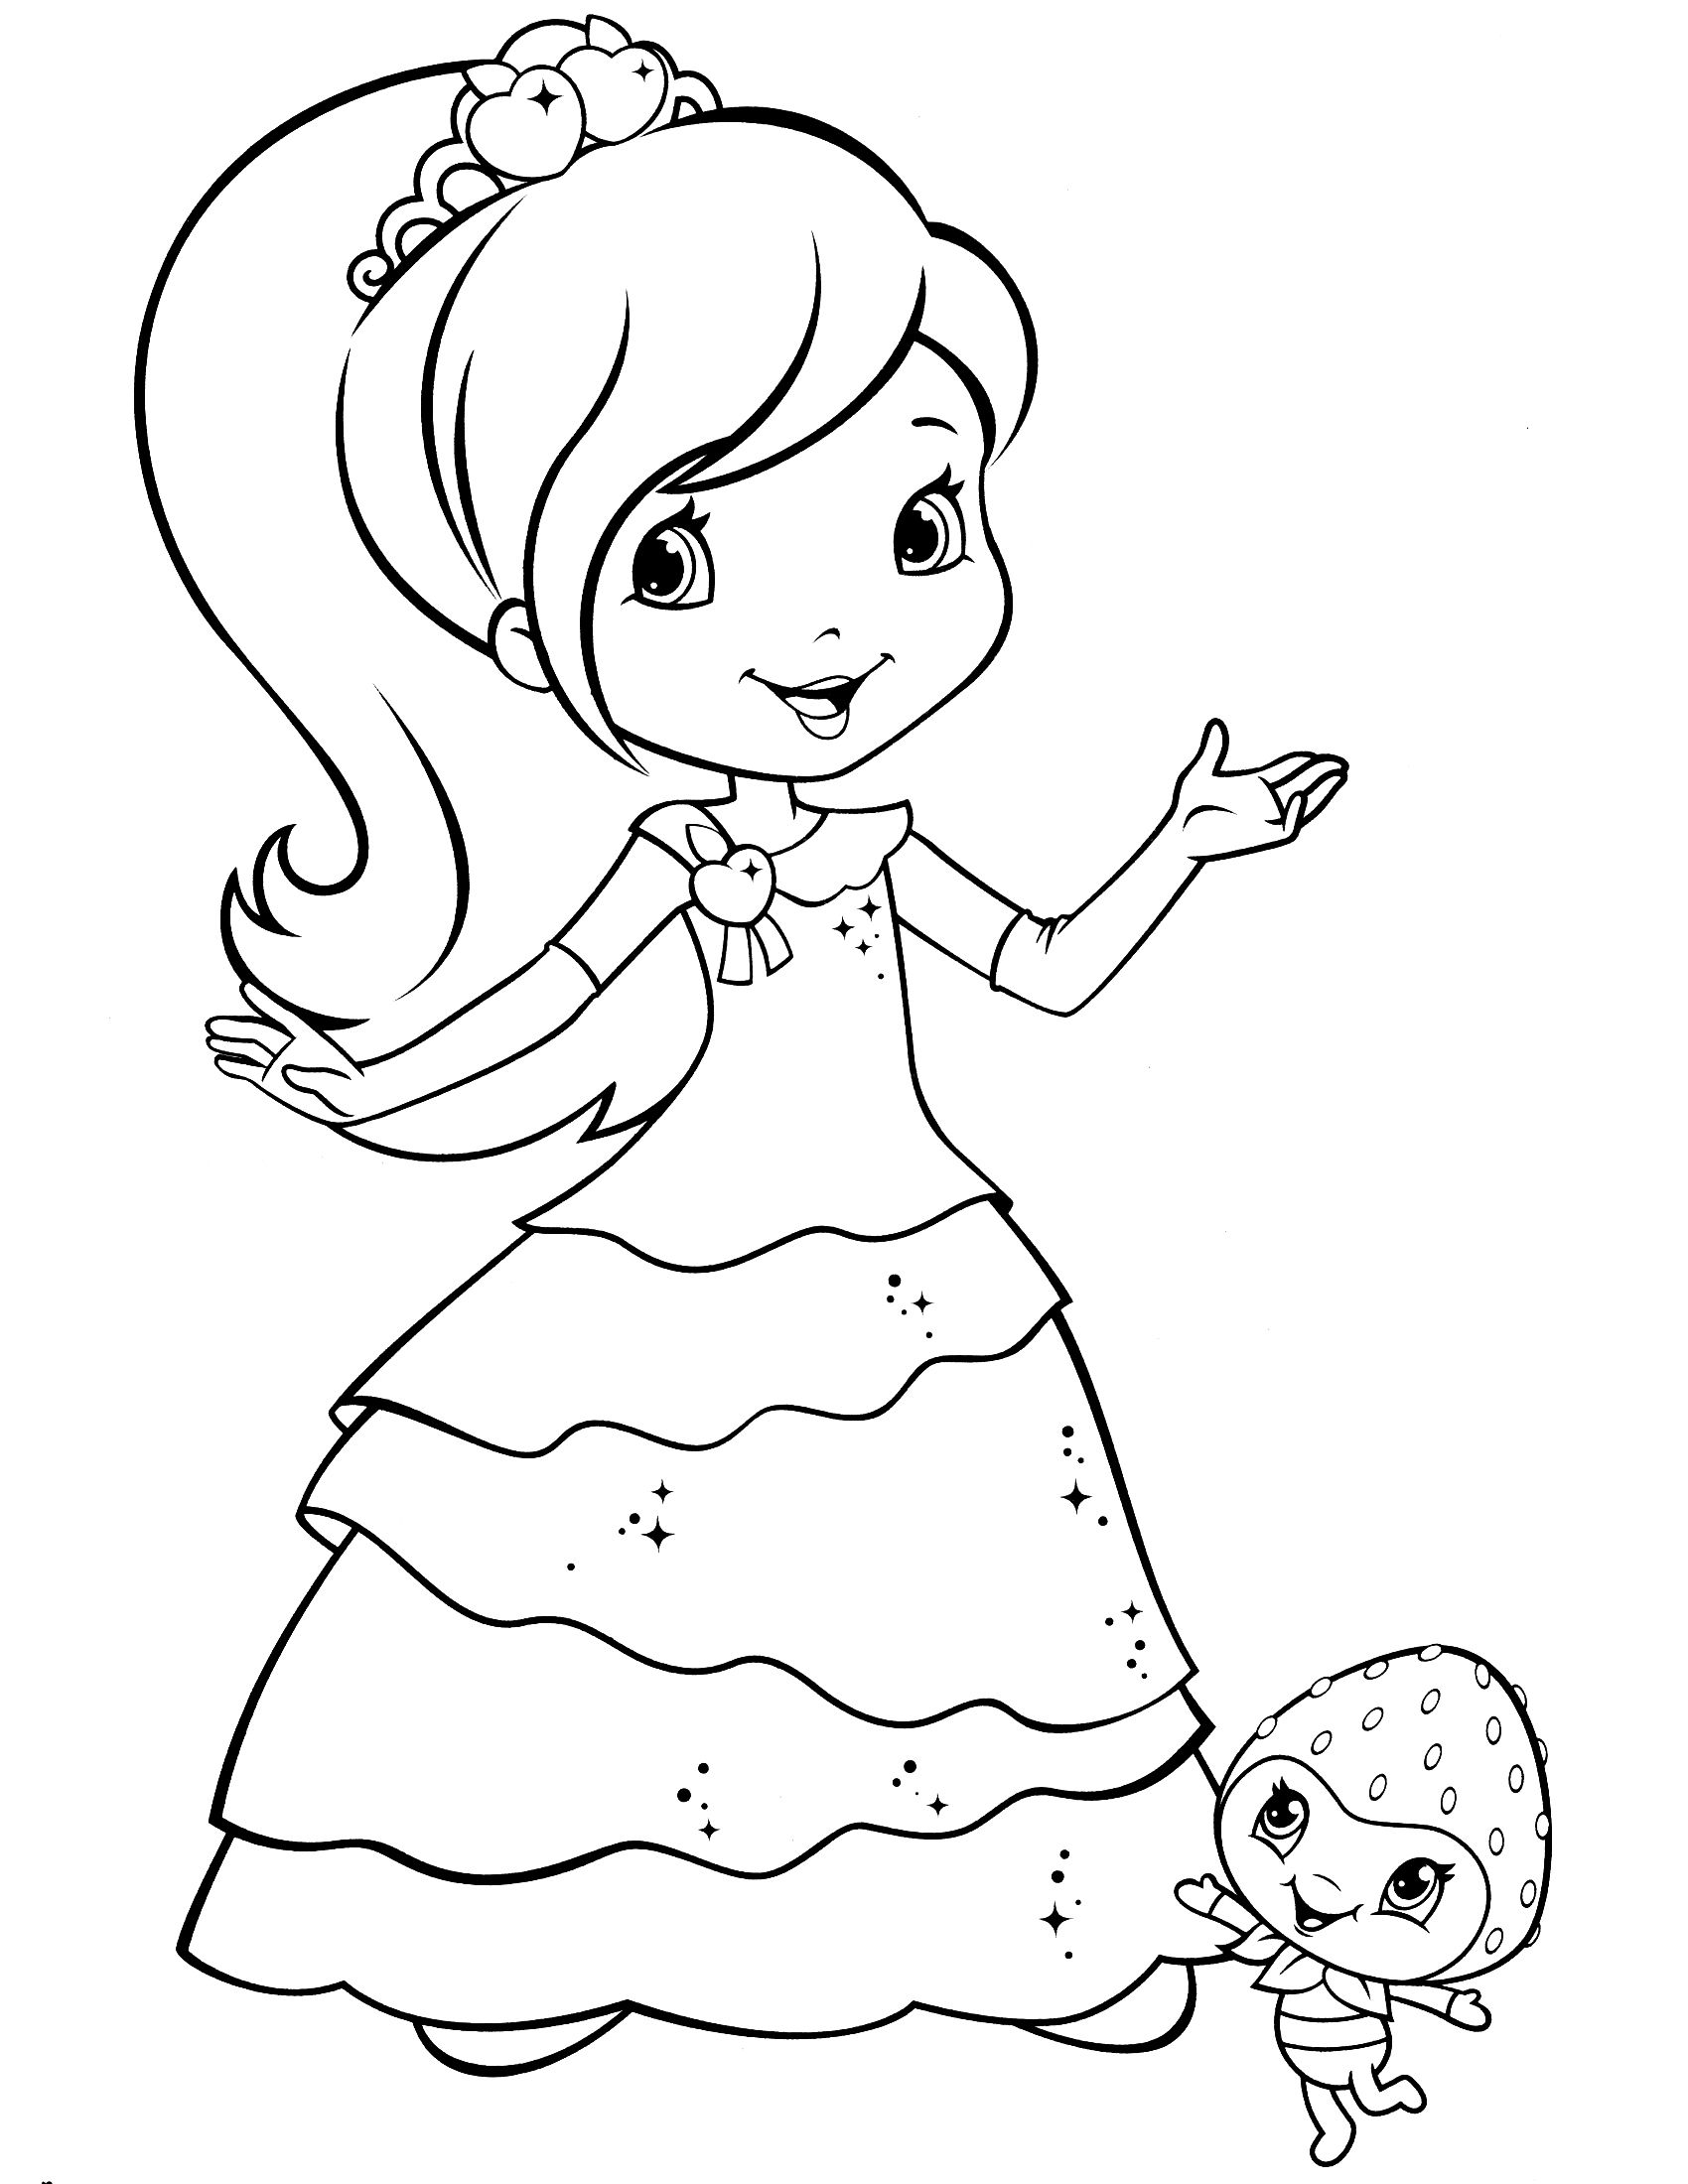 strawberry shortcake colouring pages to print strawberry shortcake coloring page dibujos para colorear shortcake strawberry to colouring pages print 